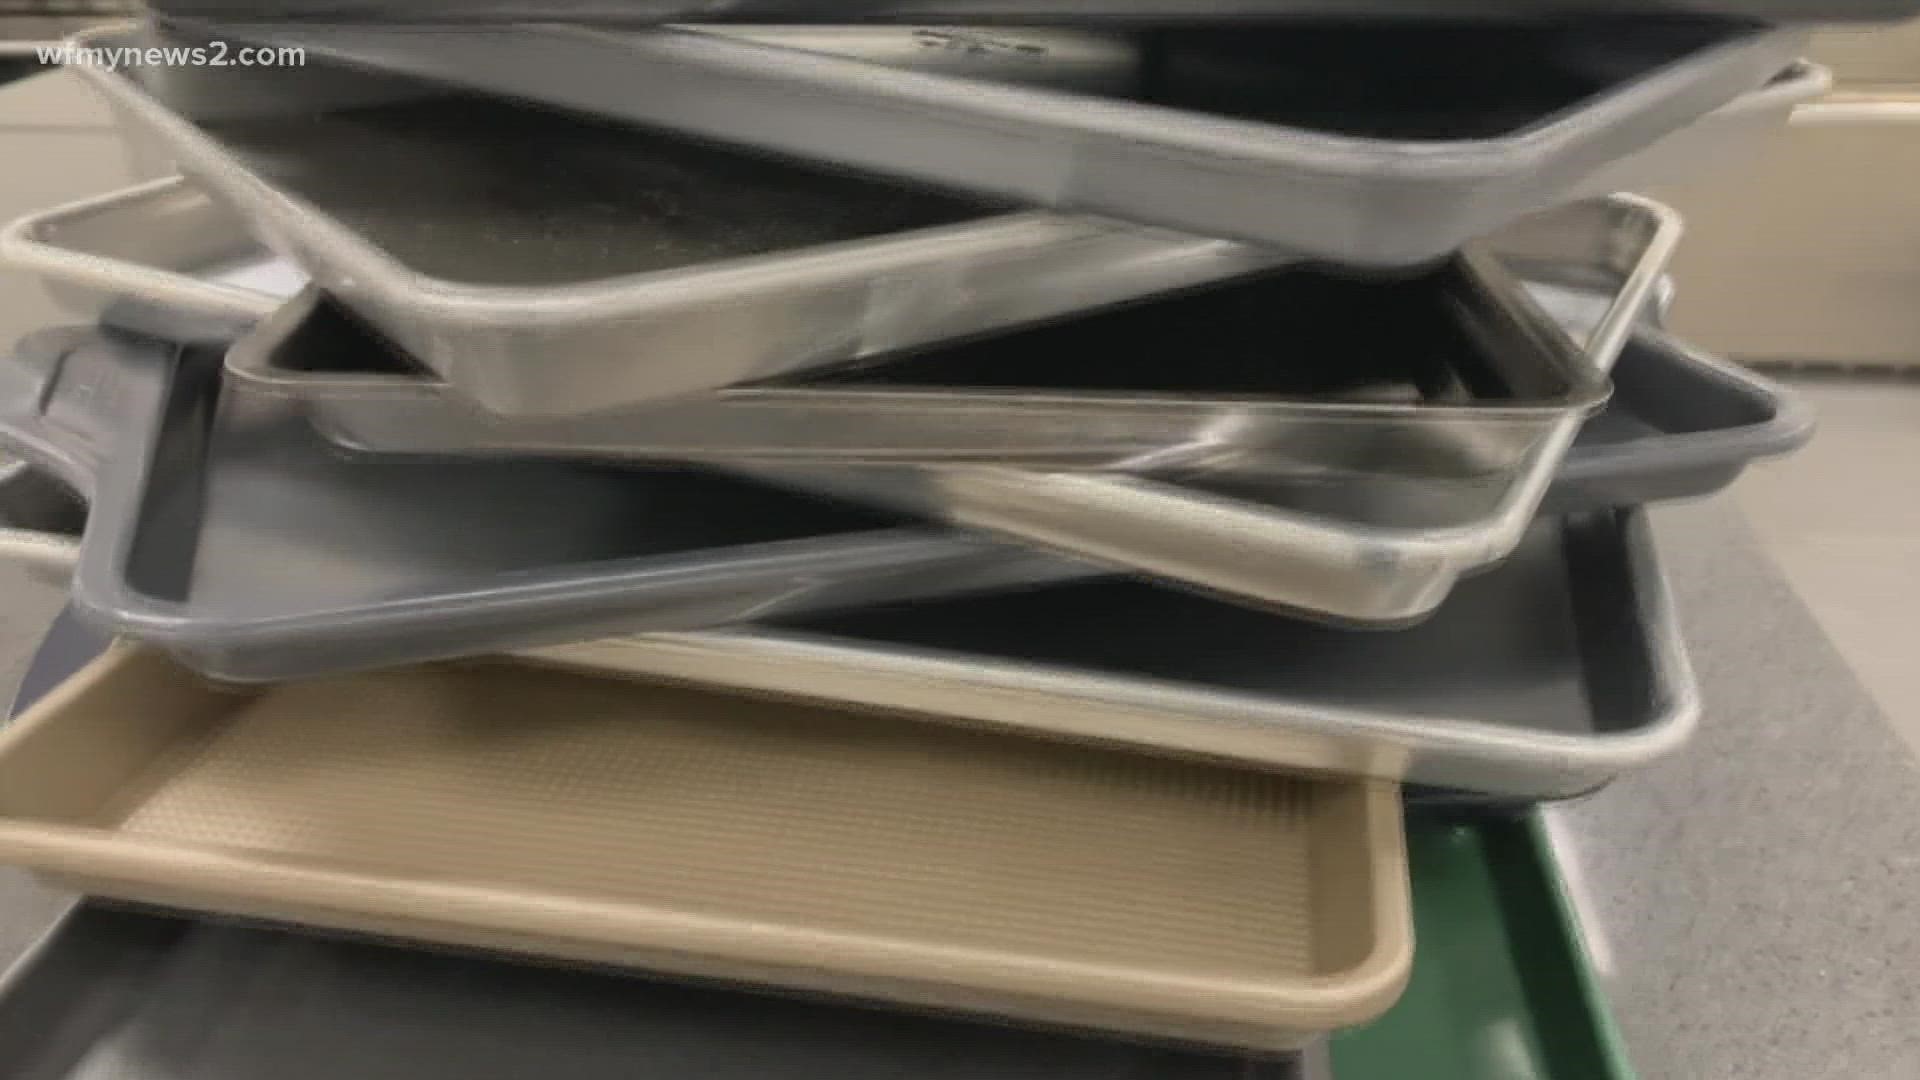 Consumer Reports tested 19 sheet pans to measure which was the best to use in the kitchen.